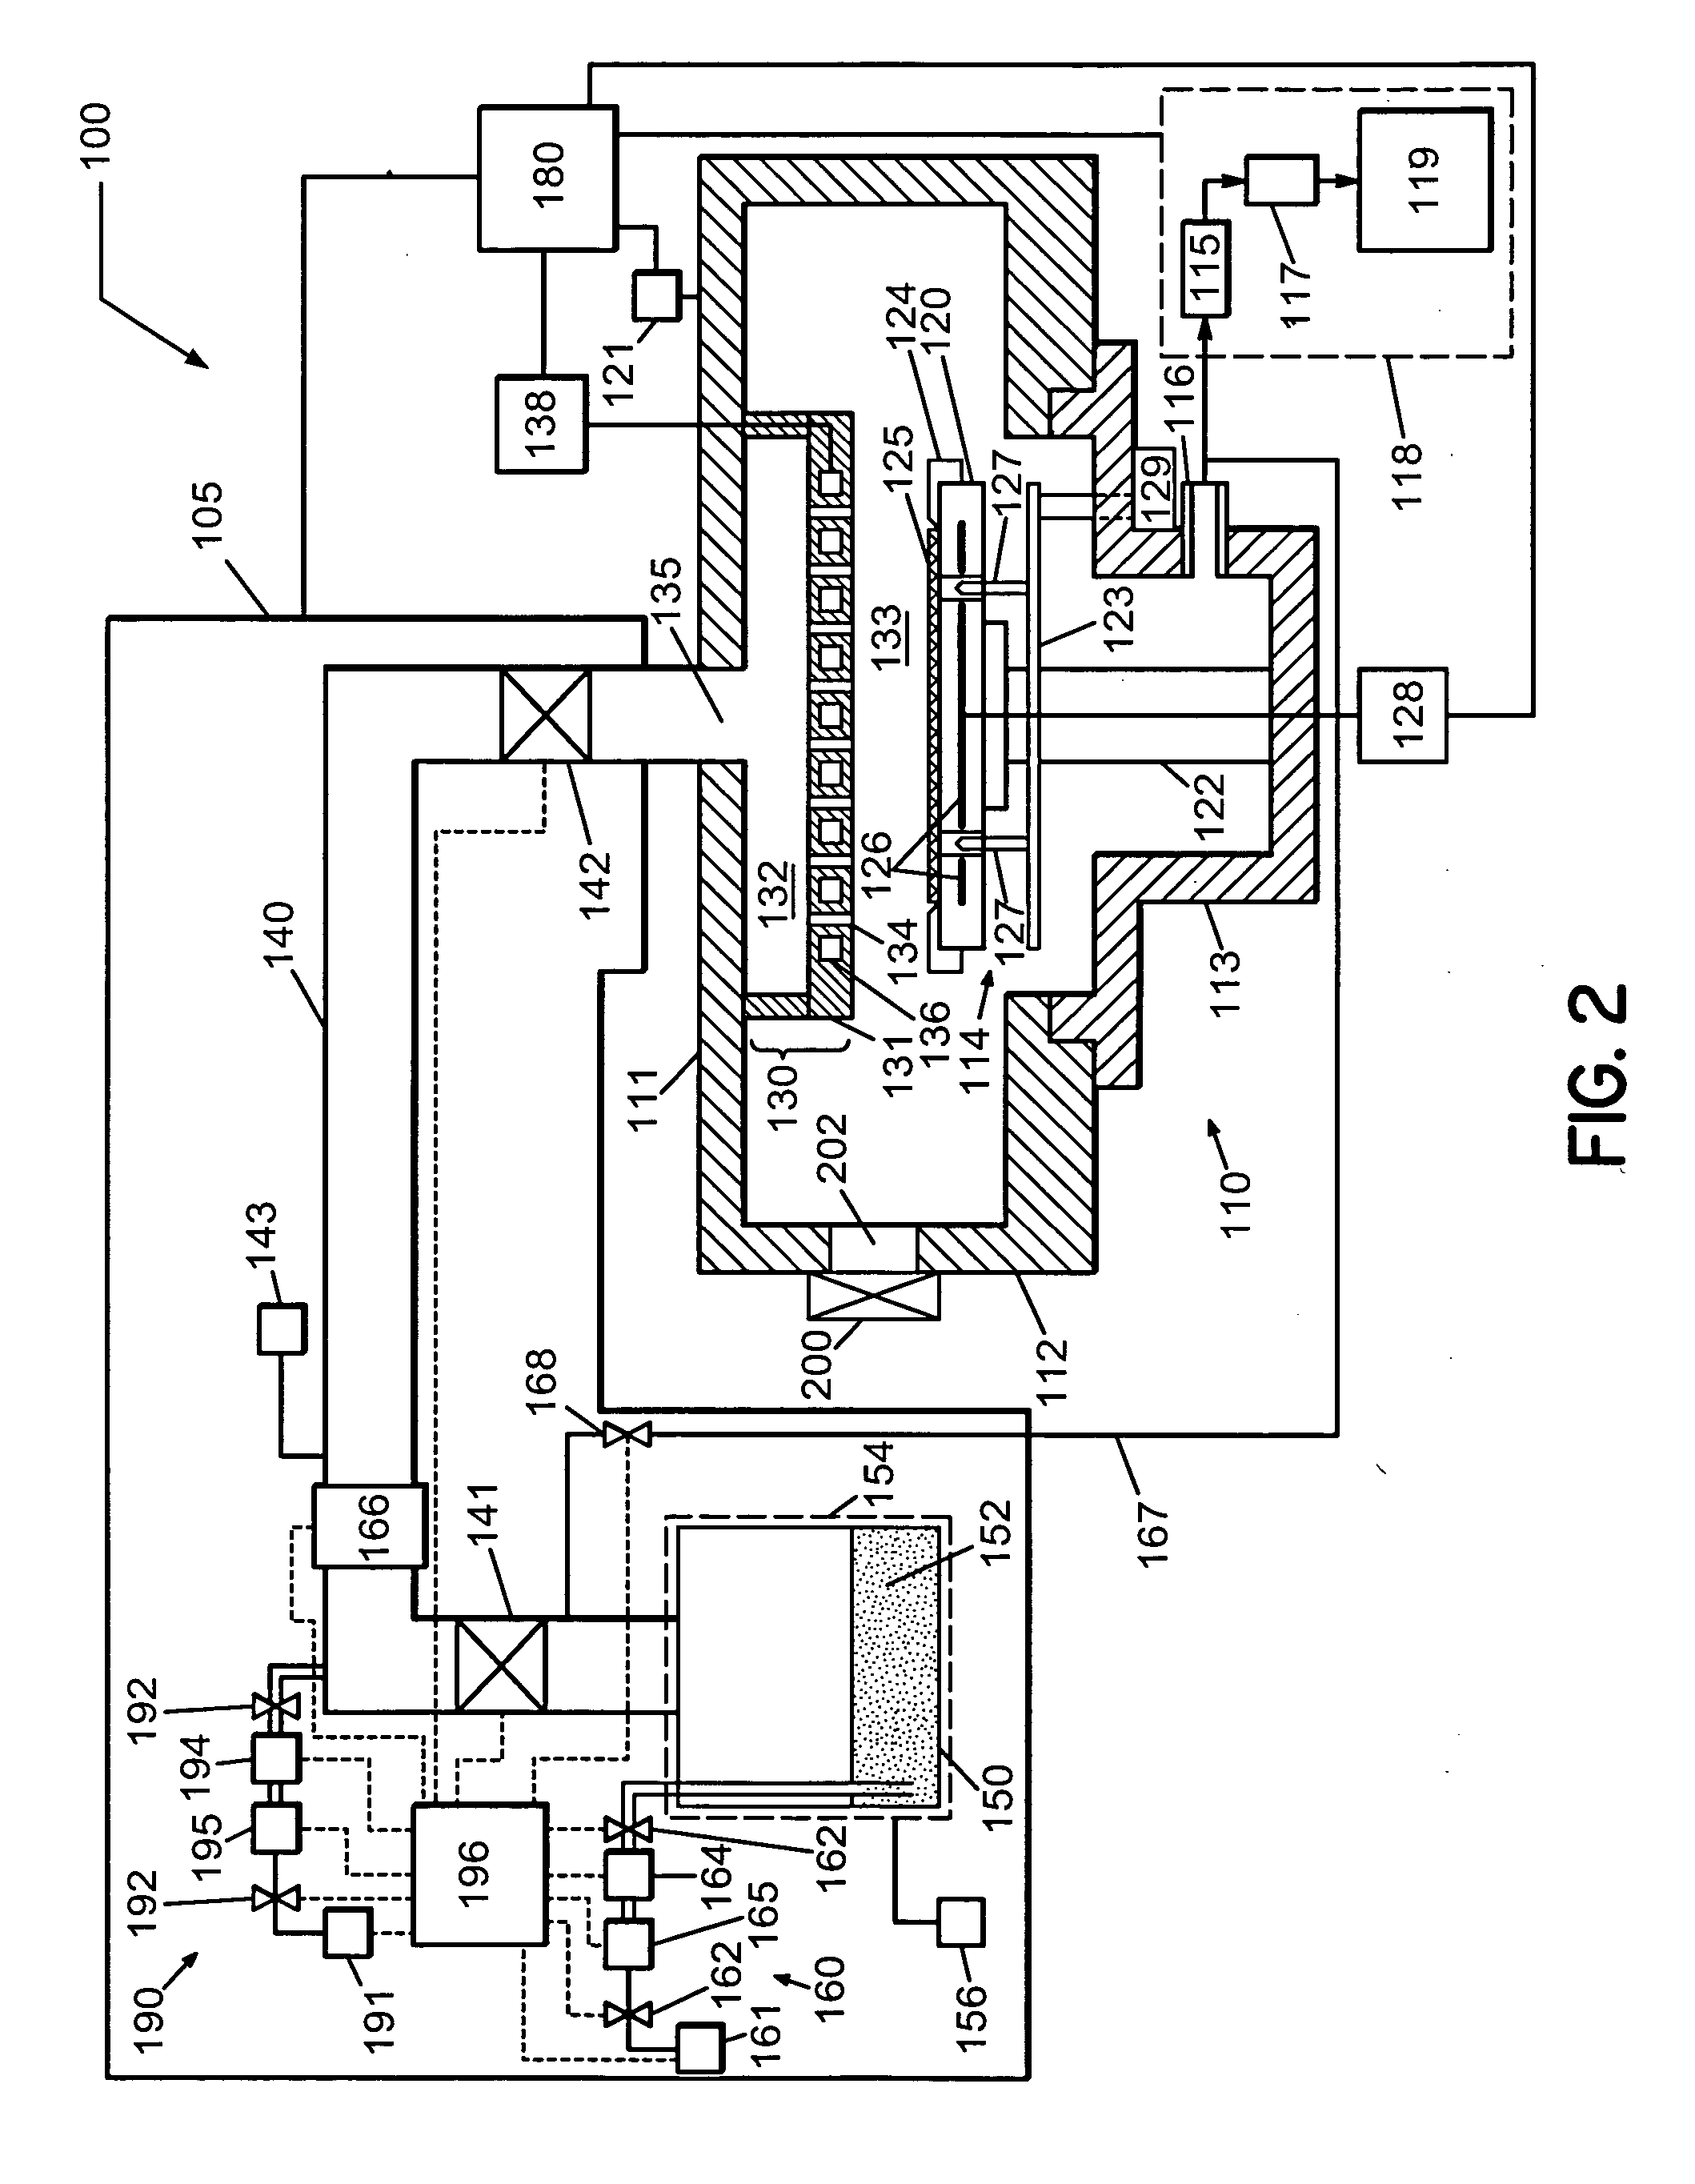 Method and system for measuring a flow rate in a solid precursor delivery system